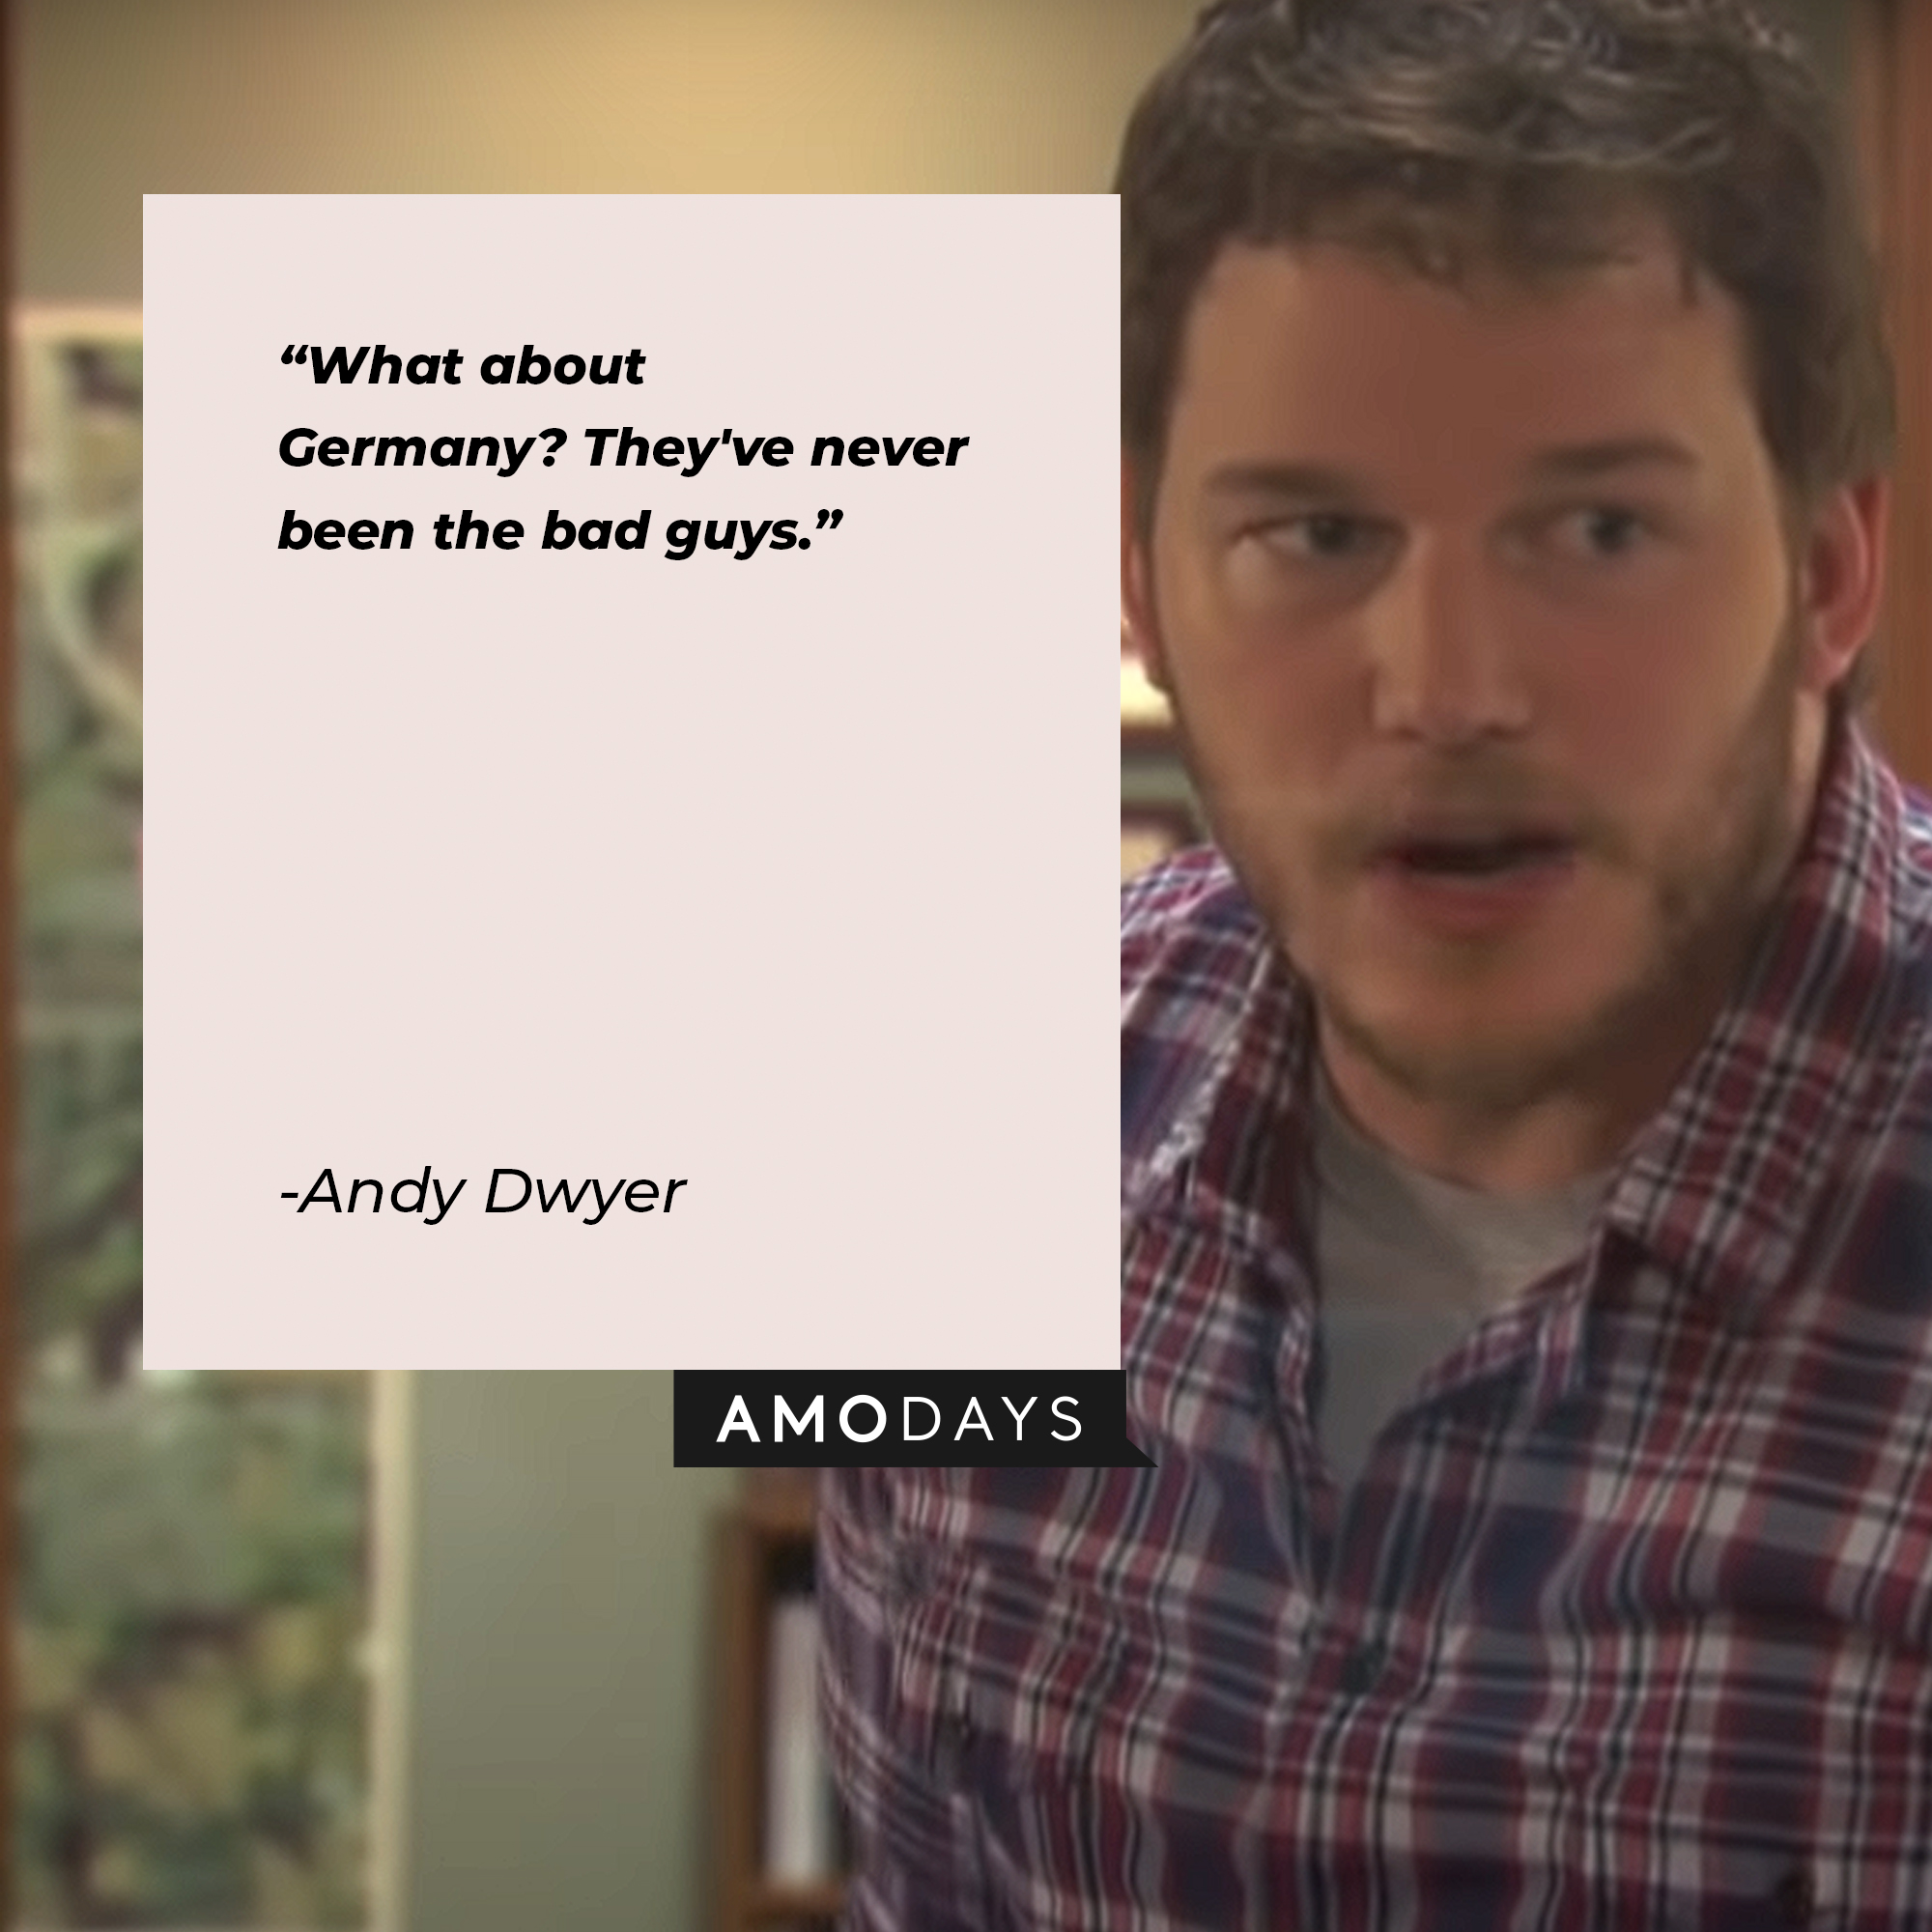 A picture of Andy Dwyer with his quote: "What about Germany? They've never been the bad guys." | Source: youtube.com/ParksandRecreation